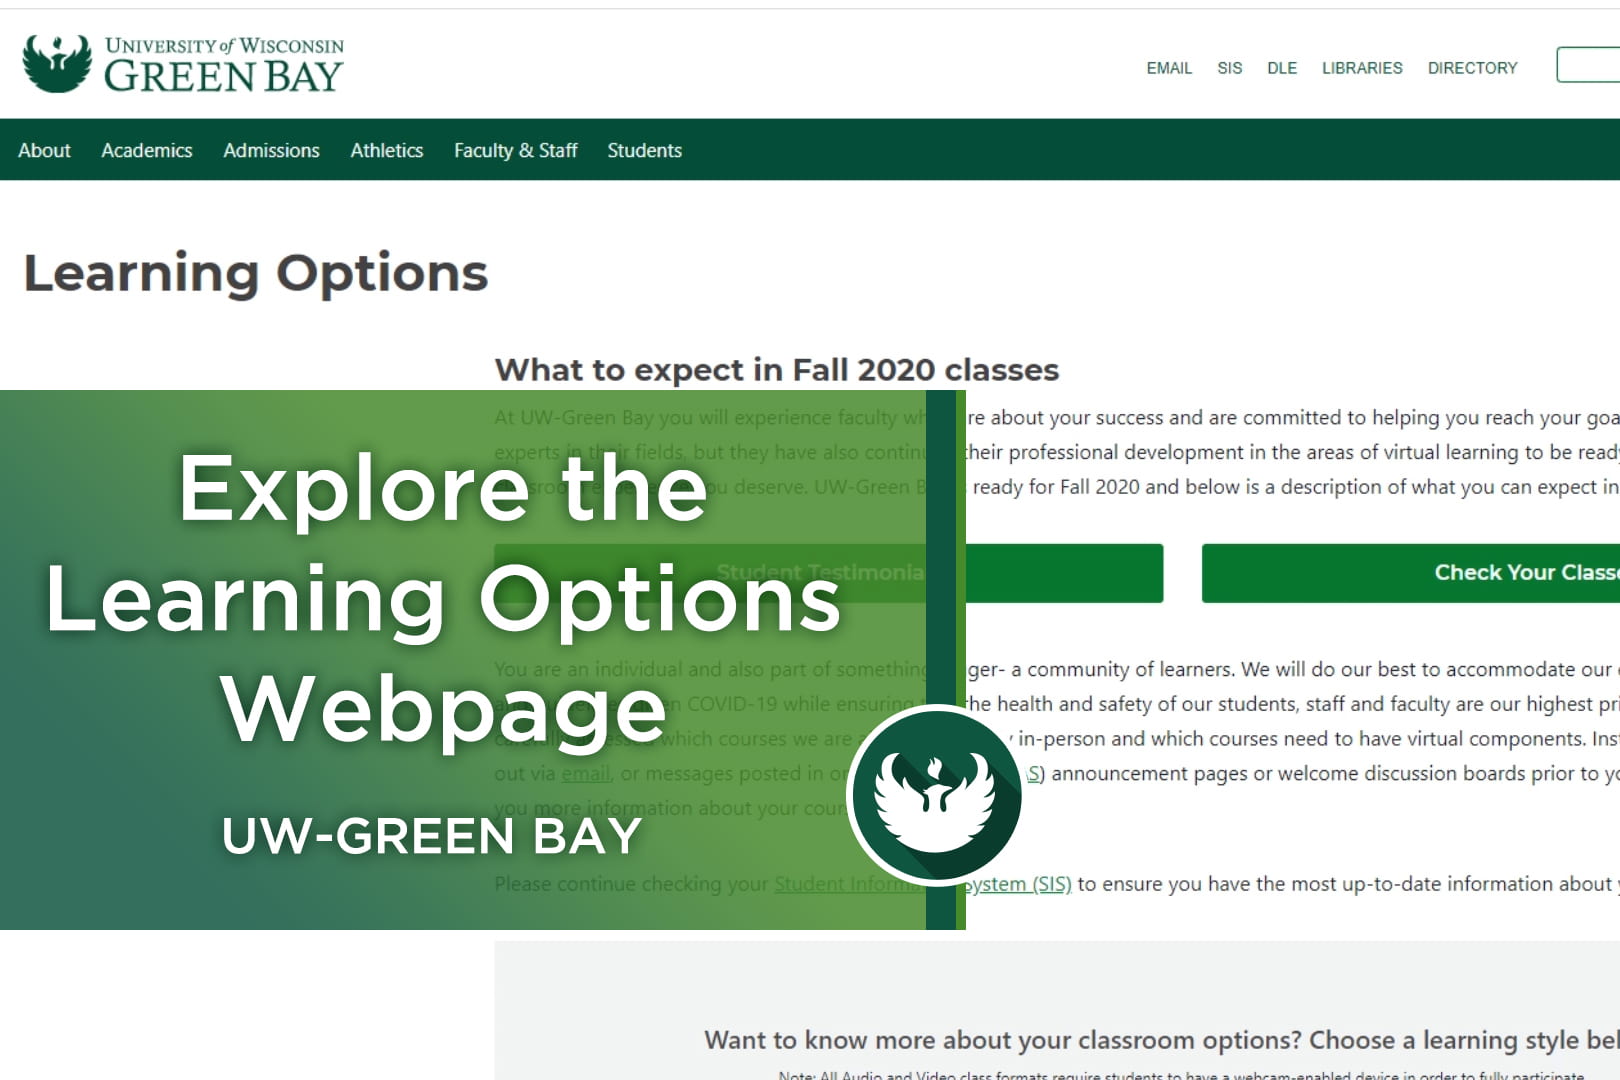 Photo of the UW-Green Bay Learning Options webpage.